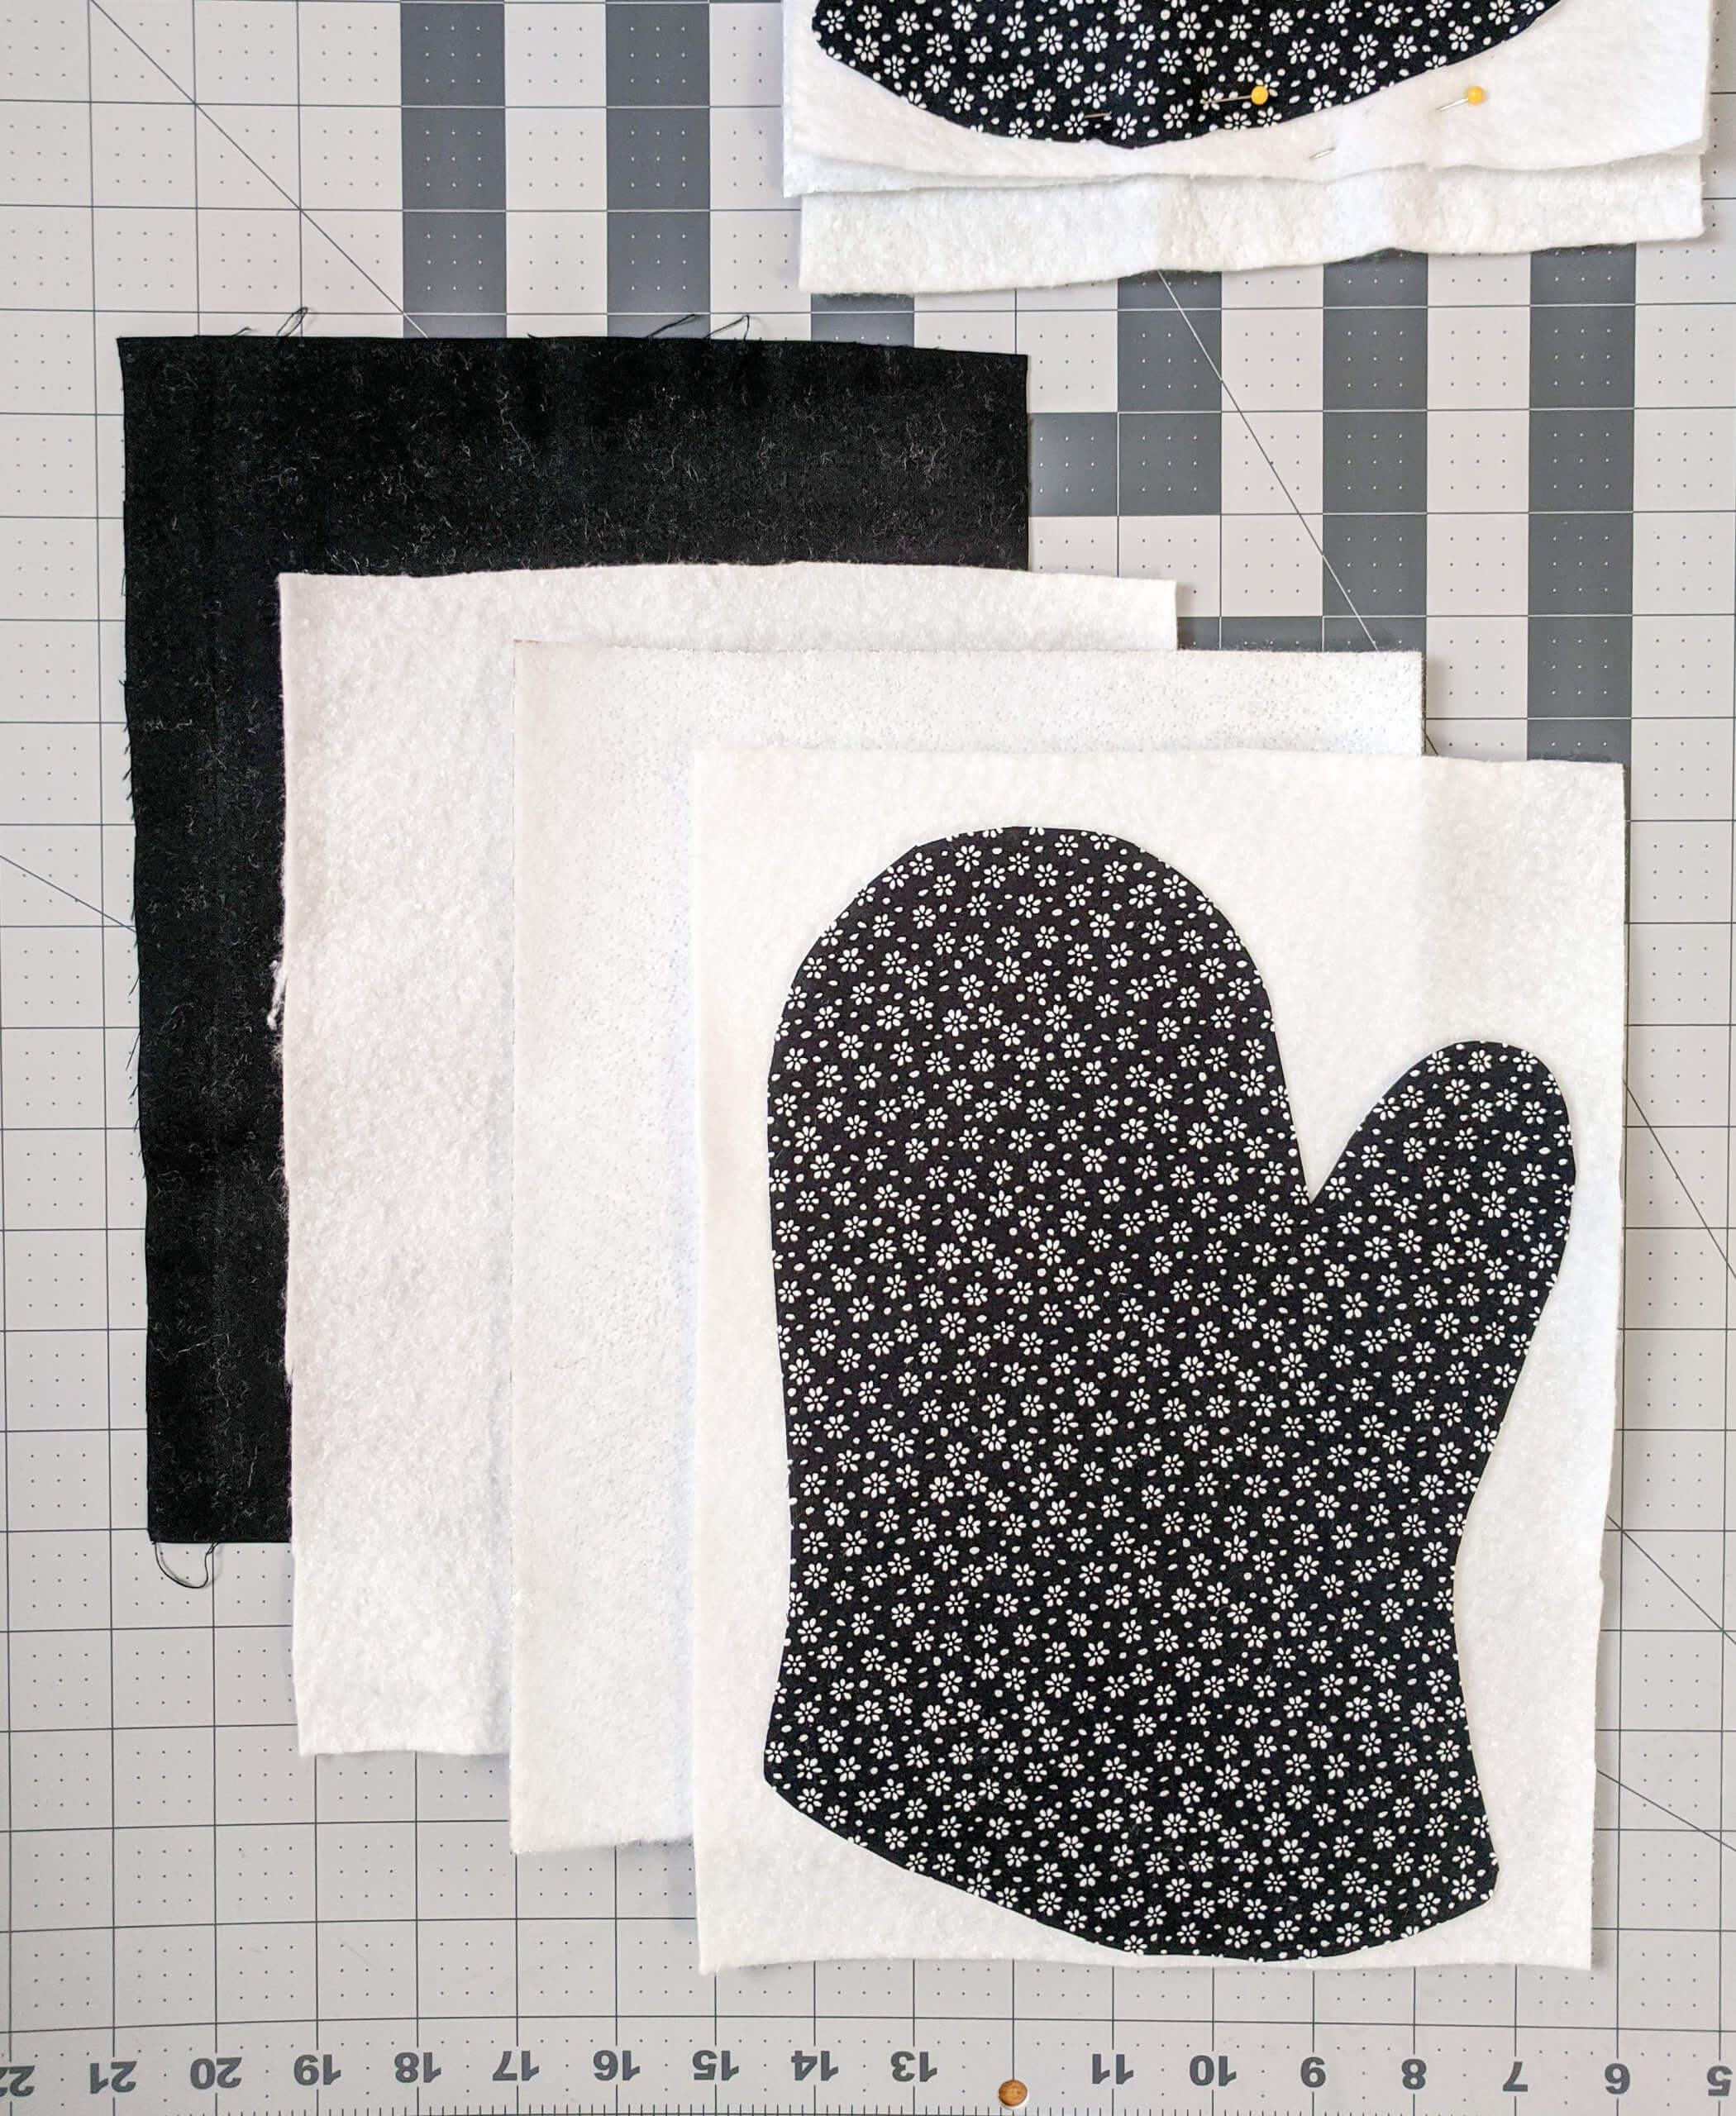 Cutting pattern pieces for DIY oven mitts insulation